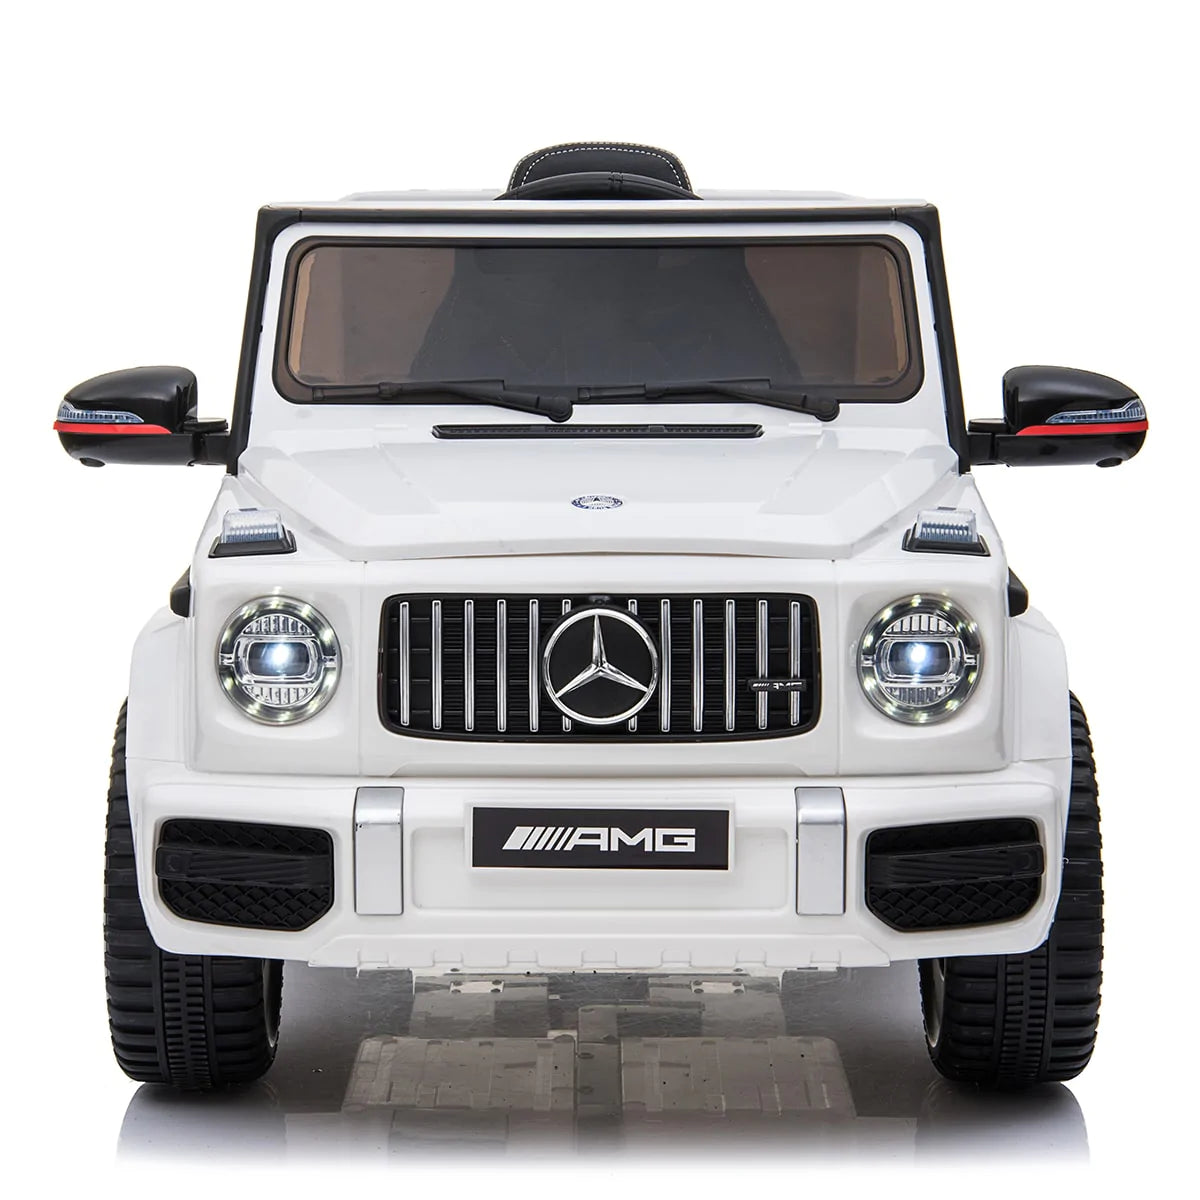 Licensed Mercedes G wagon G63 12v upgraded High Door Kids Ride On Car Jeep with parental remote control  - White